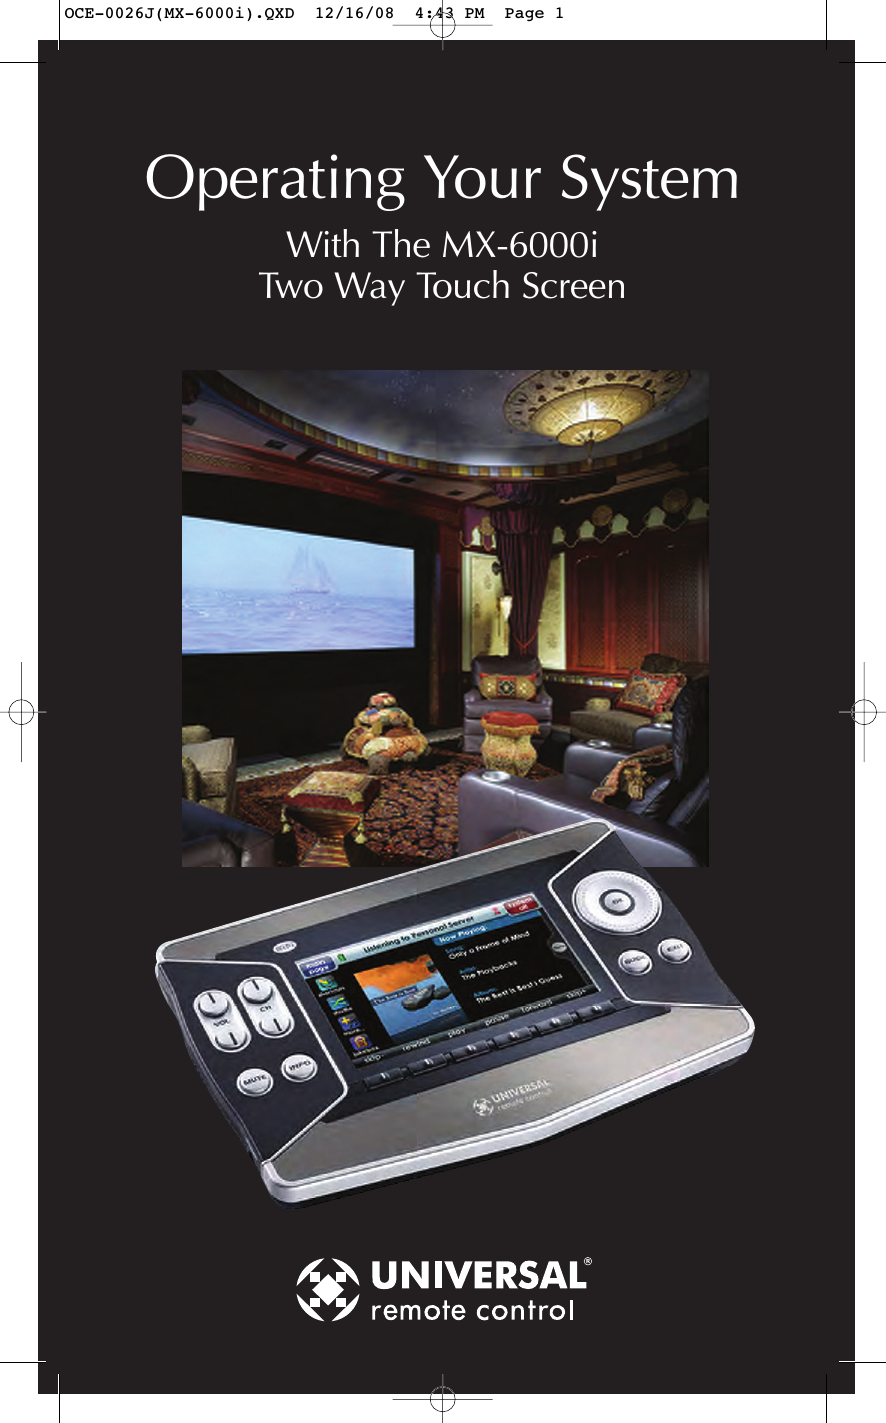 Operating Your SystemWith The MX-6000iTwo Way Touch ScreenOCE-0026J(MX-6000i).QXD  12/16/08  4:43 PM  Page 1